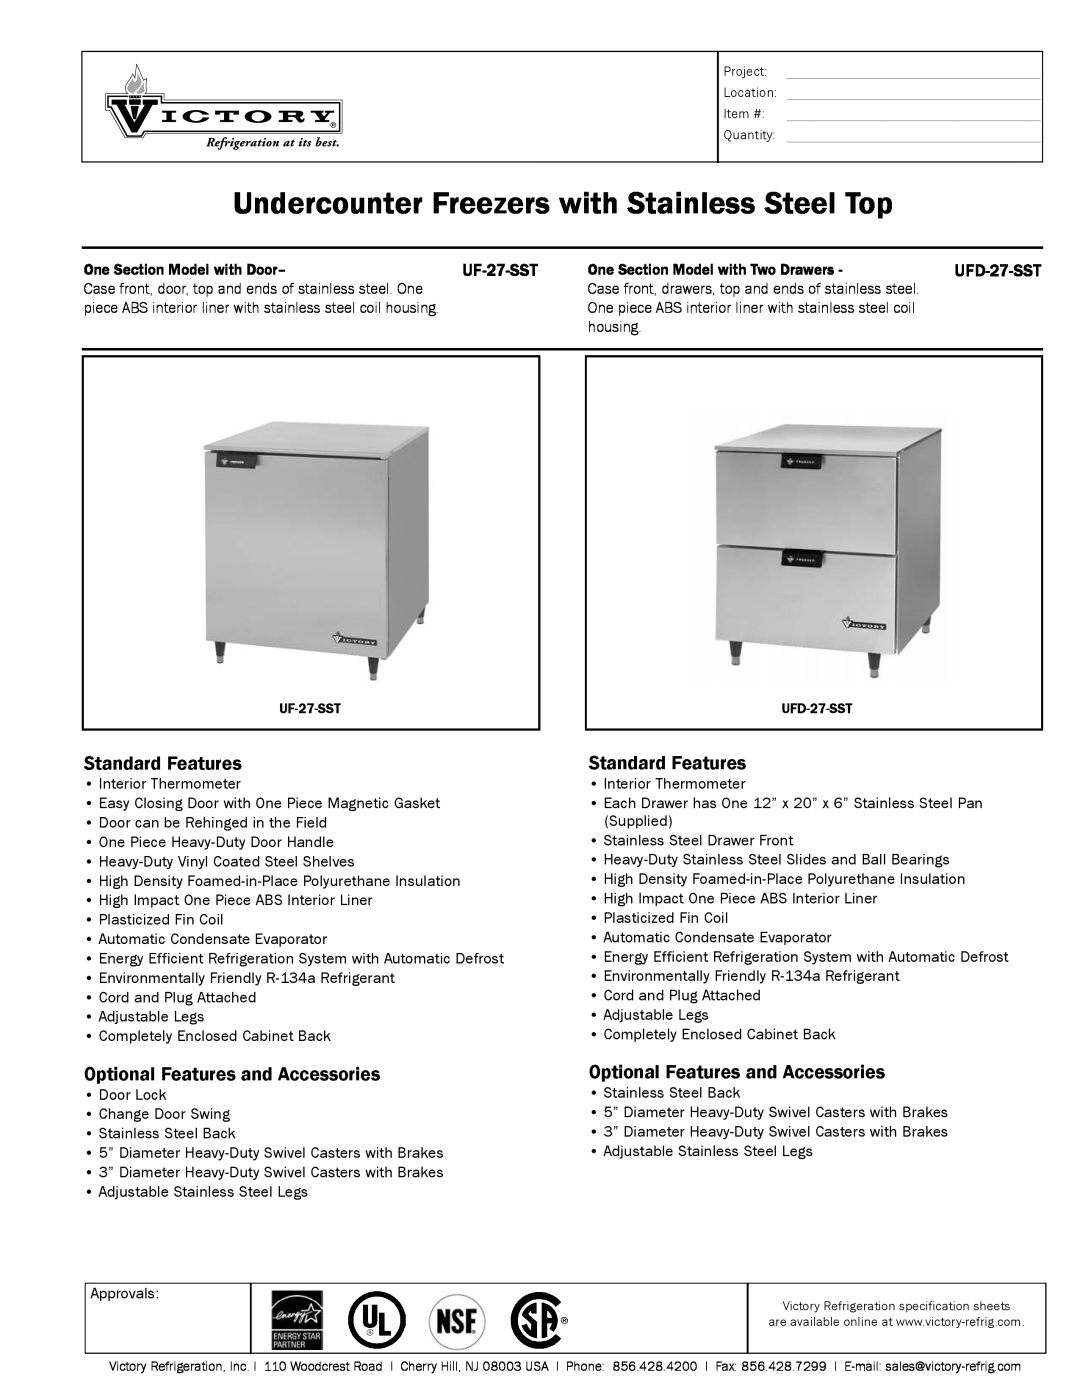 Victory Refrigeration UFD-227-SSST specifications Undercounter Freezers with Stainless Steel Top, Standard Features 